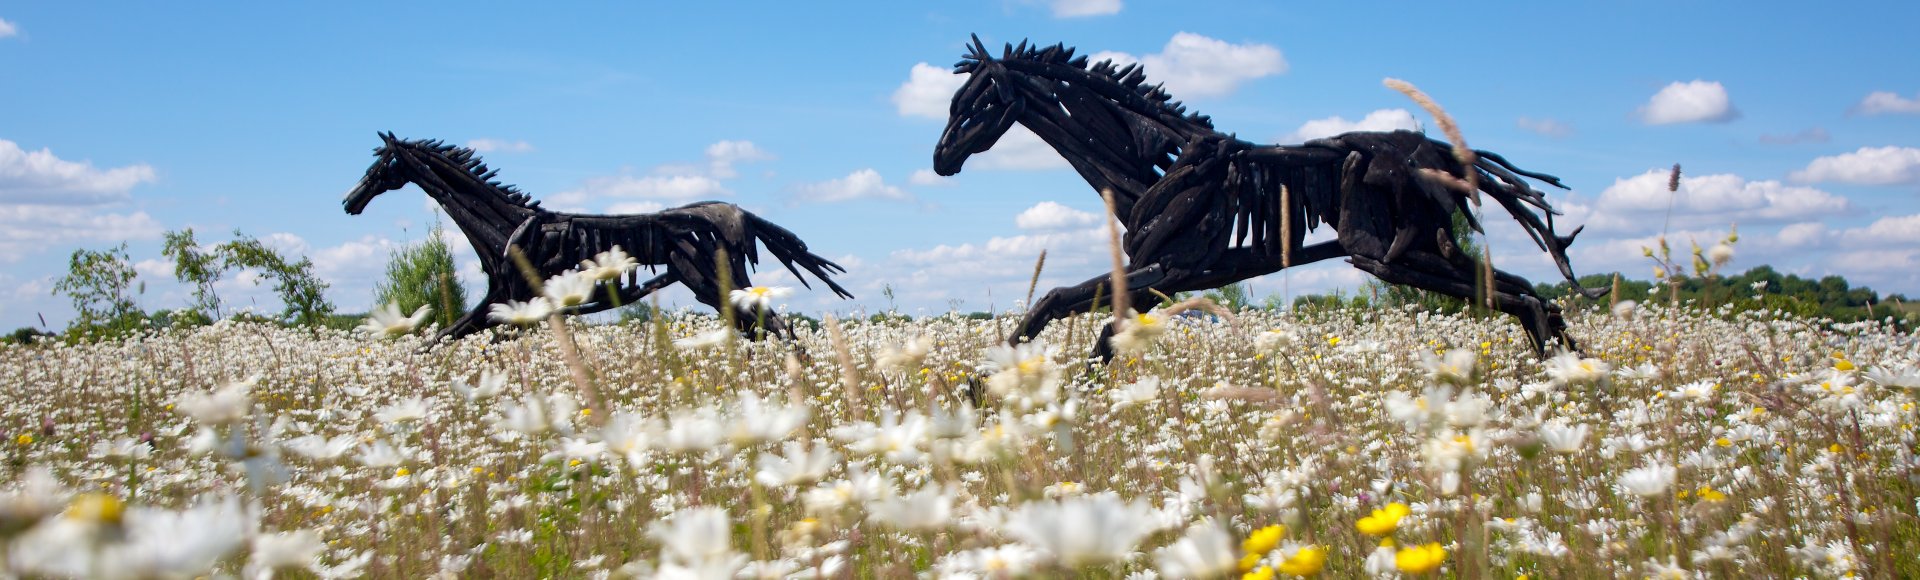 Image of Art Structure - Ghost Horses in the Bog at Kildare Town Roundabout